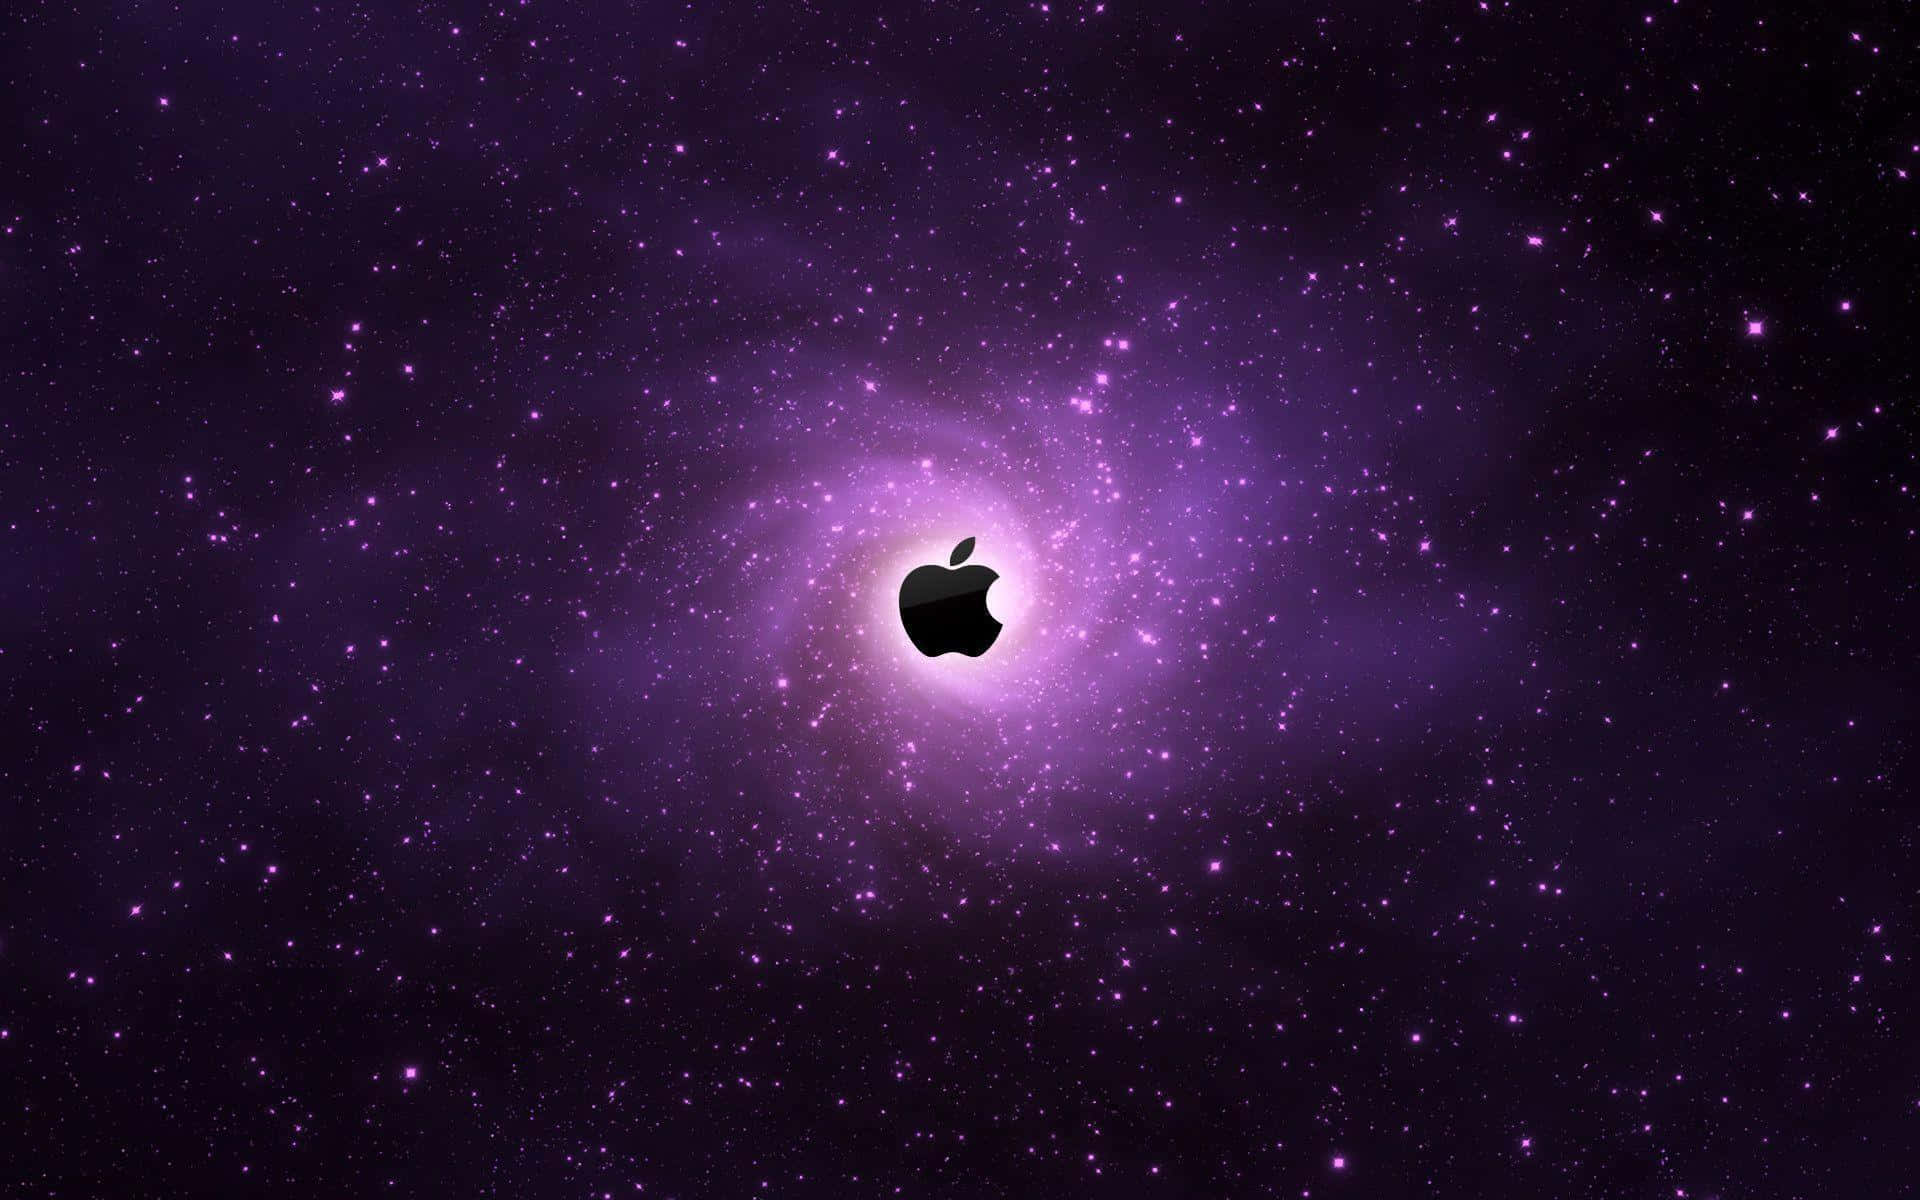 Apple Logo In The Middle Of A Purple Galaxy Wallpaper